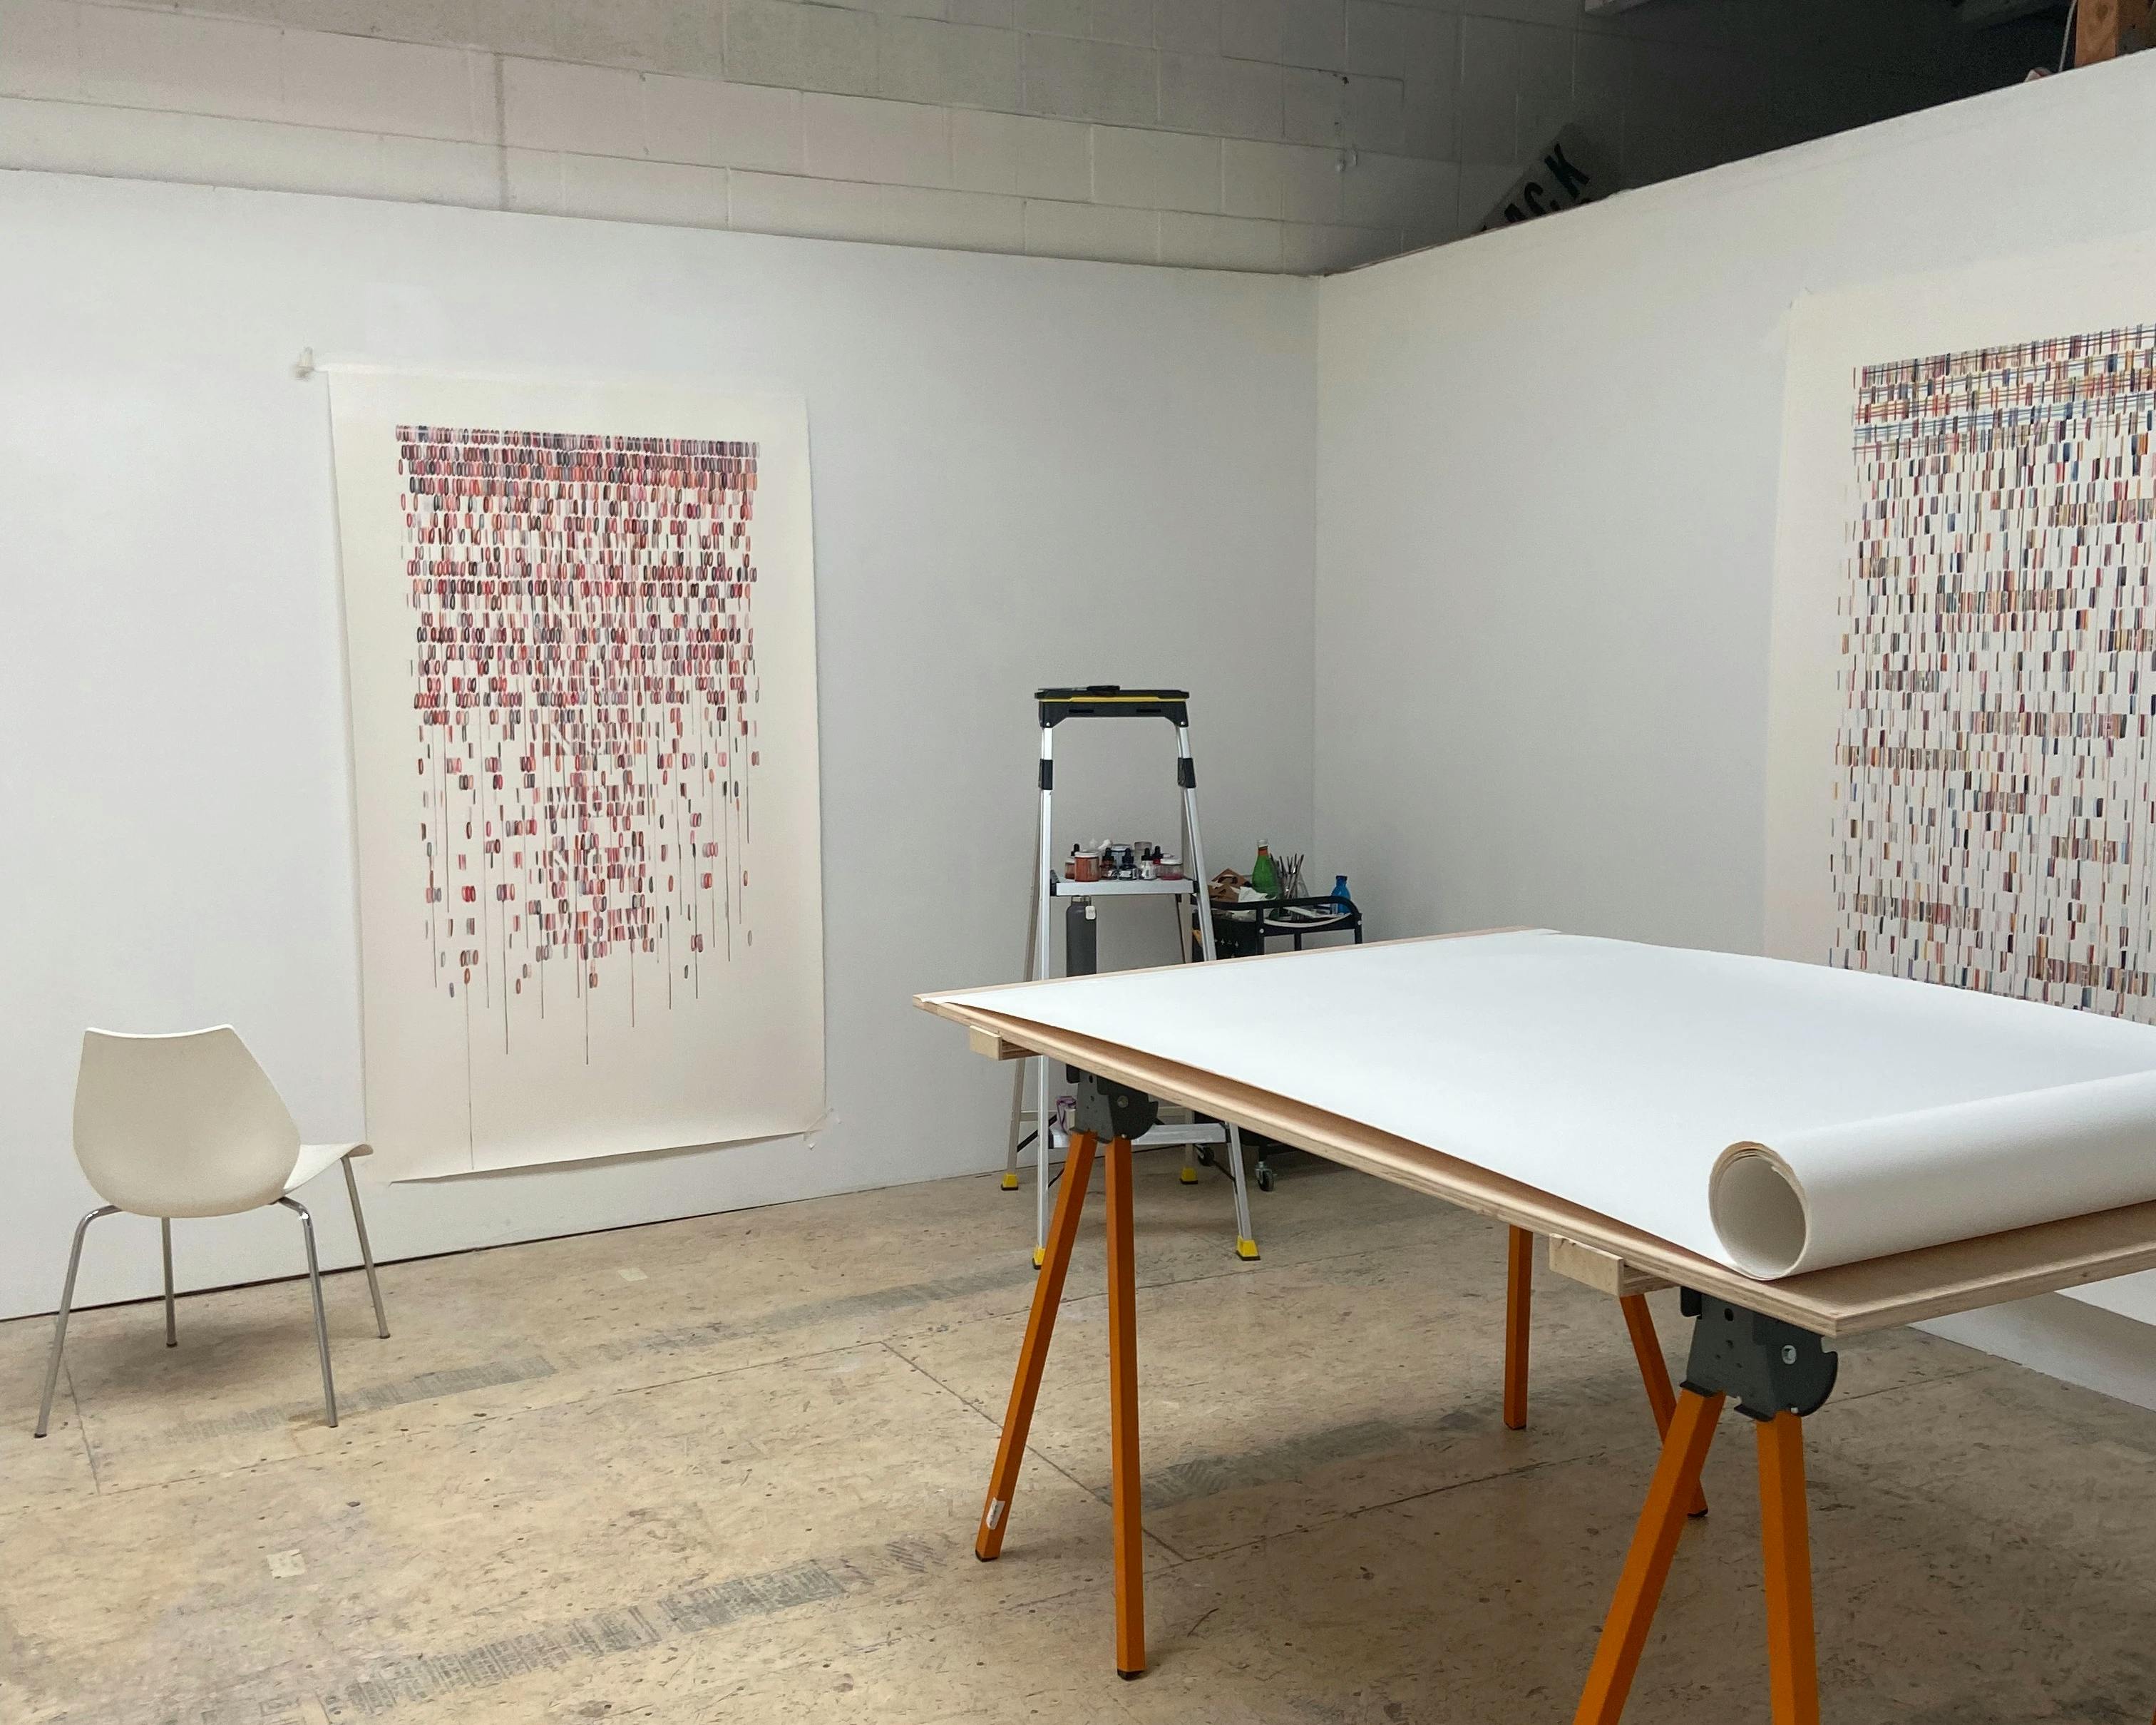 Artist Gail Tarantino's studio with large text-based works on paper installed on white walls.